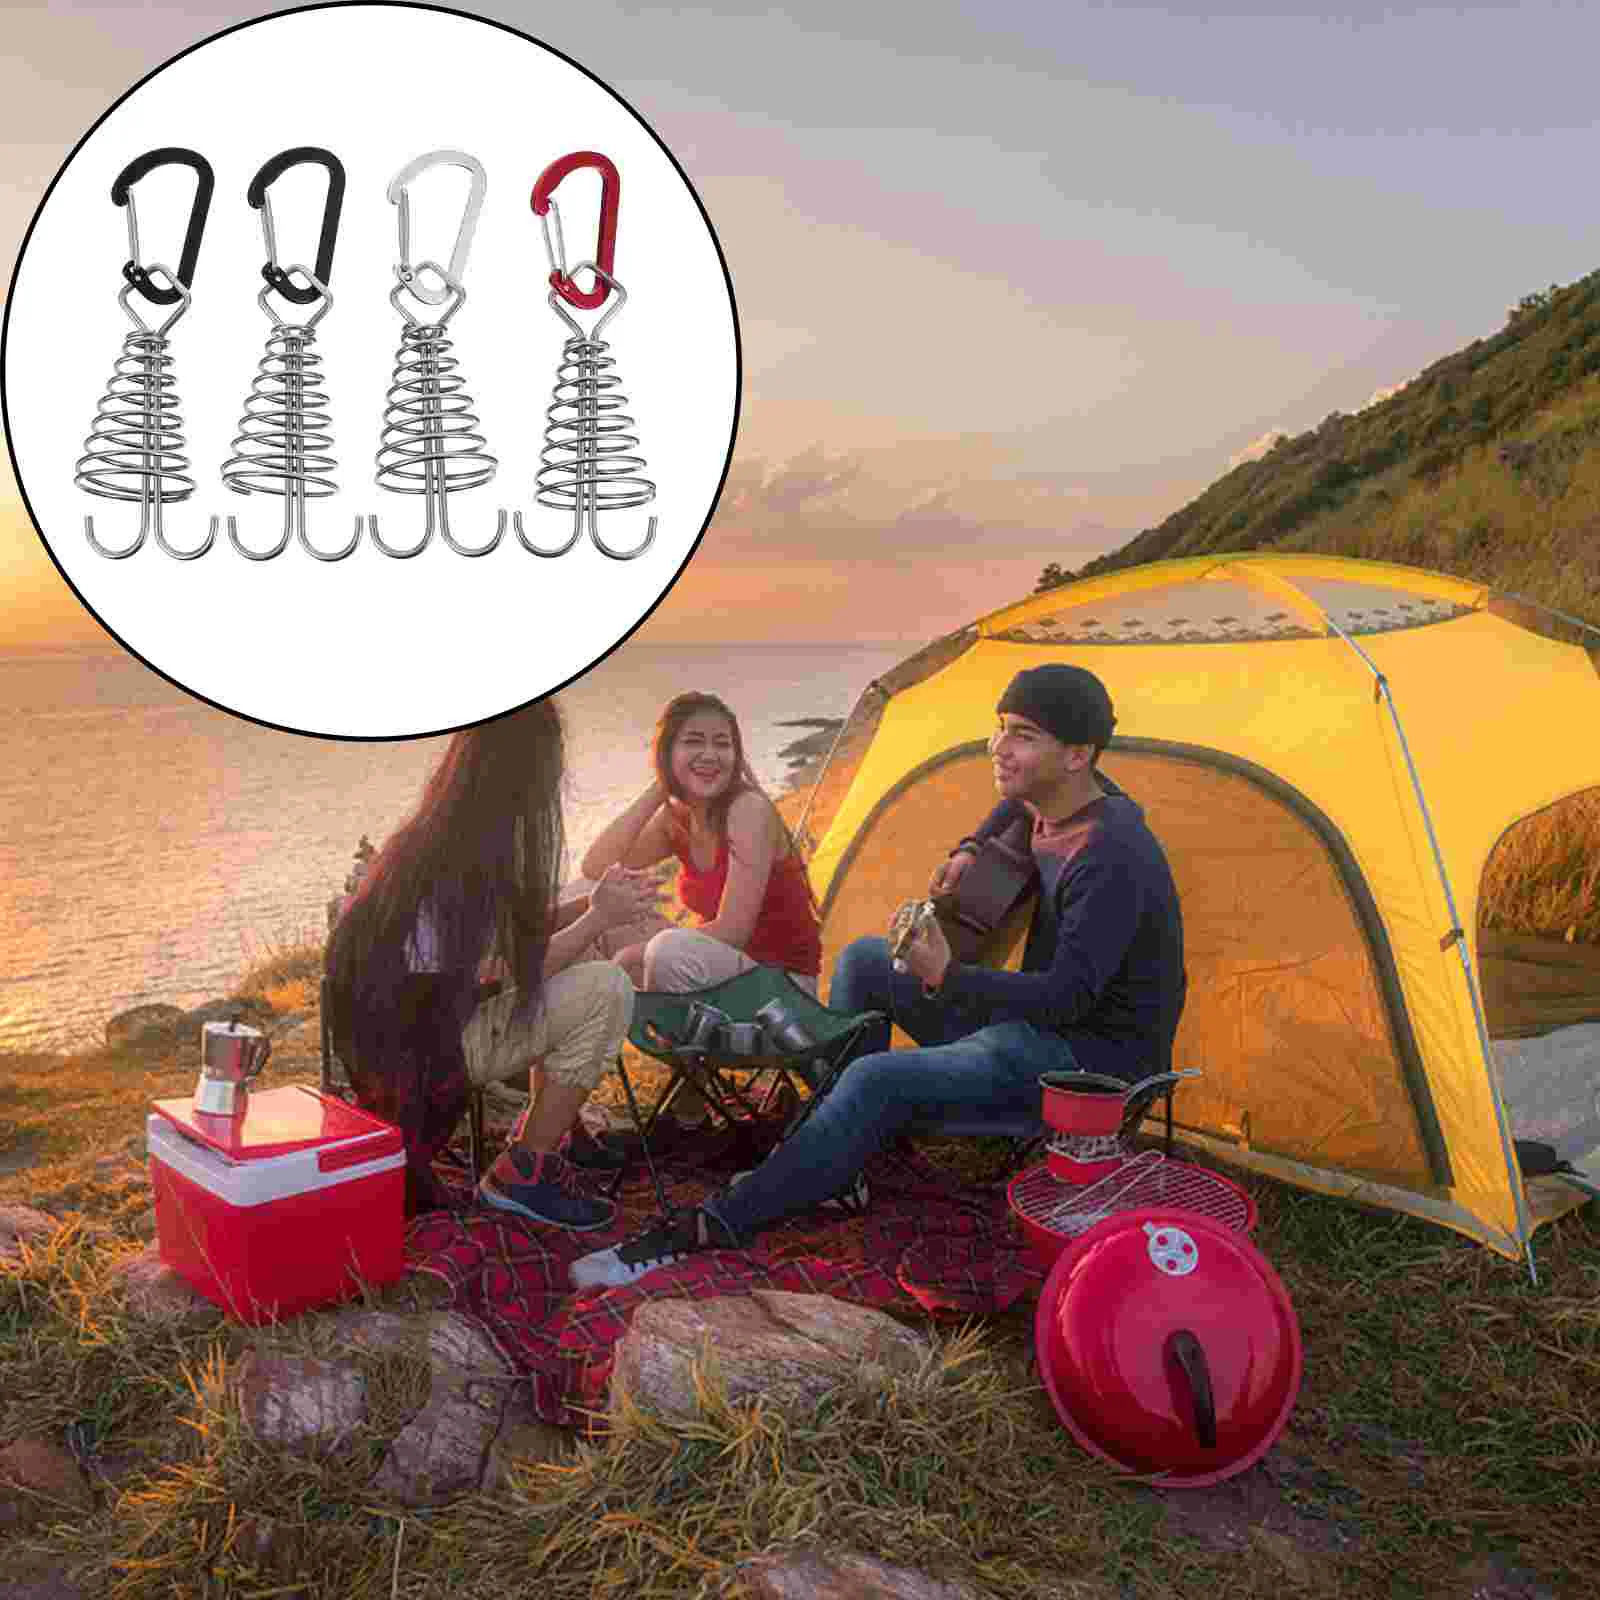 

4 Pcs Stainless Steel Carabiner Awnings Tent Stakes Pegs Deck Spring Peg Guyline Cord Adjuster Plank Board Tent Stakes